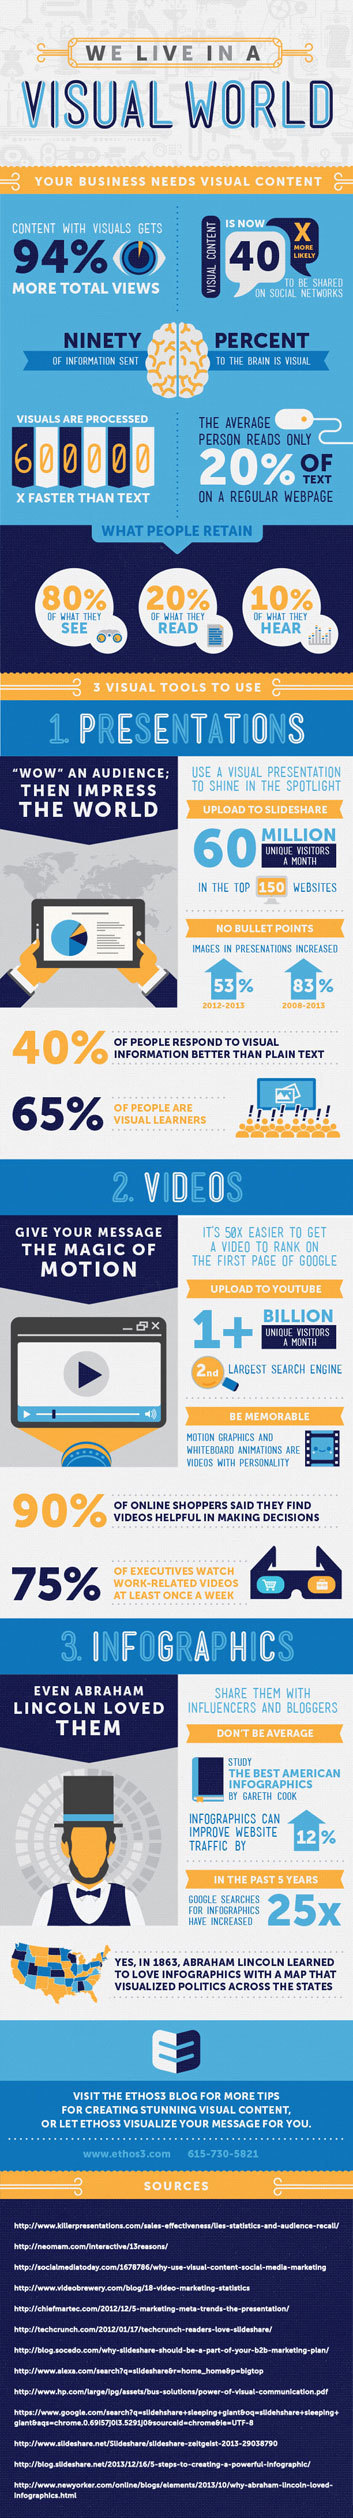 Why We're More Likely To Remember Content With Images And Video (Infographic) | MarketingHits | Scoop.it